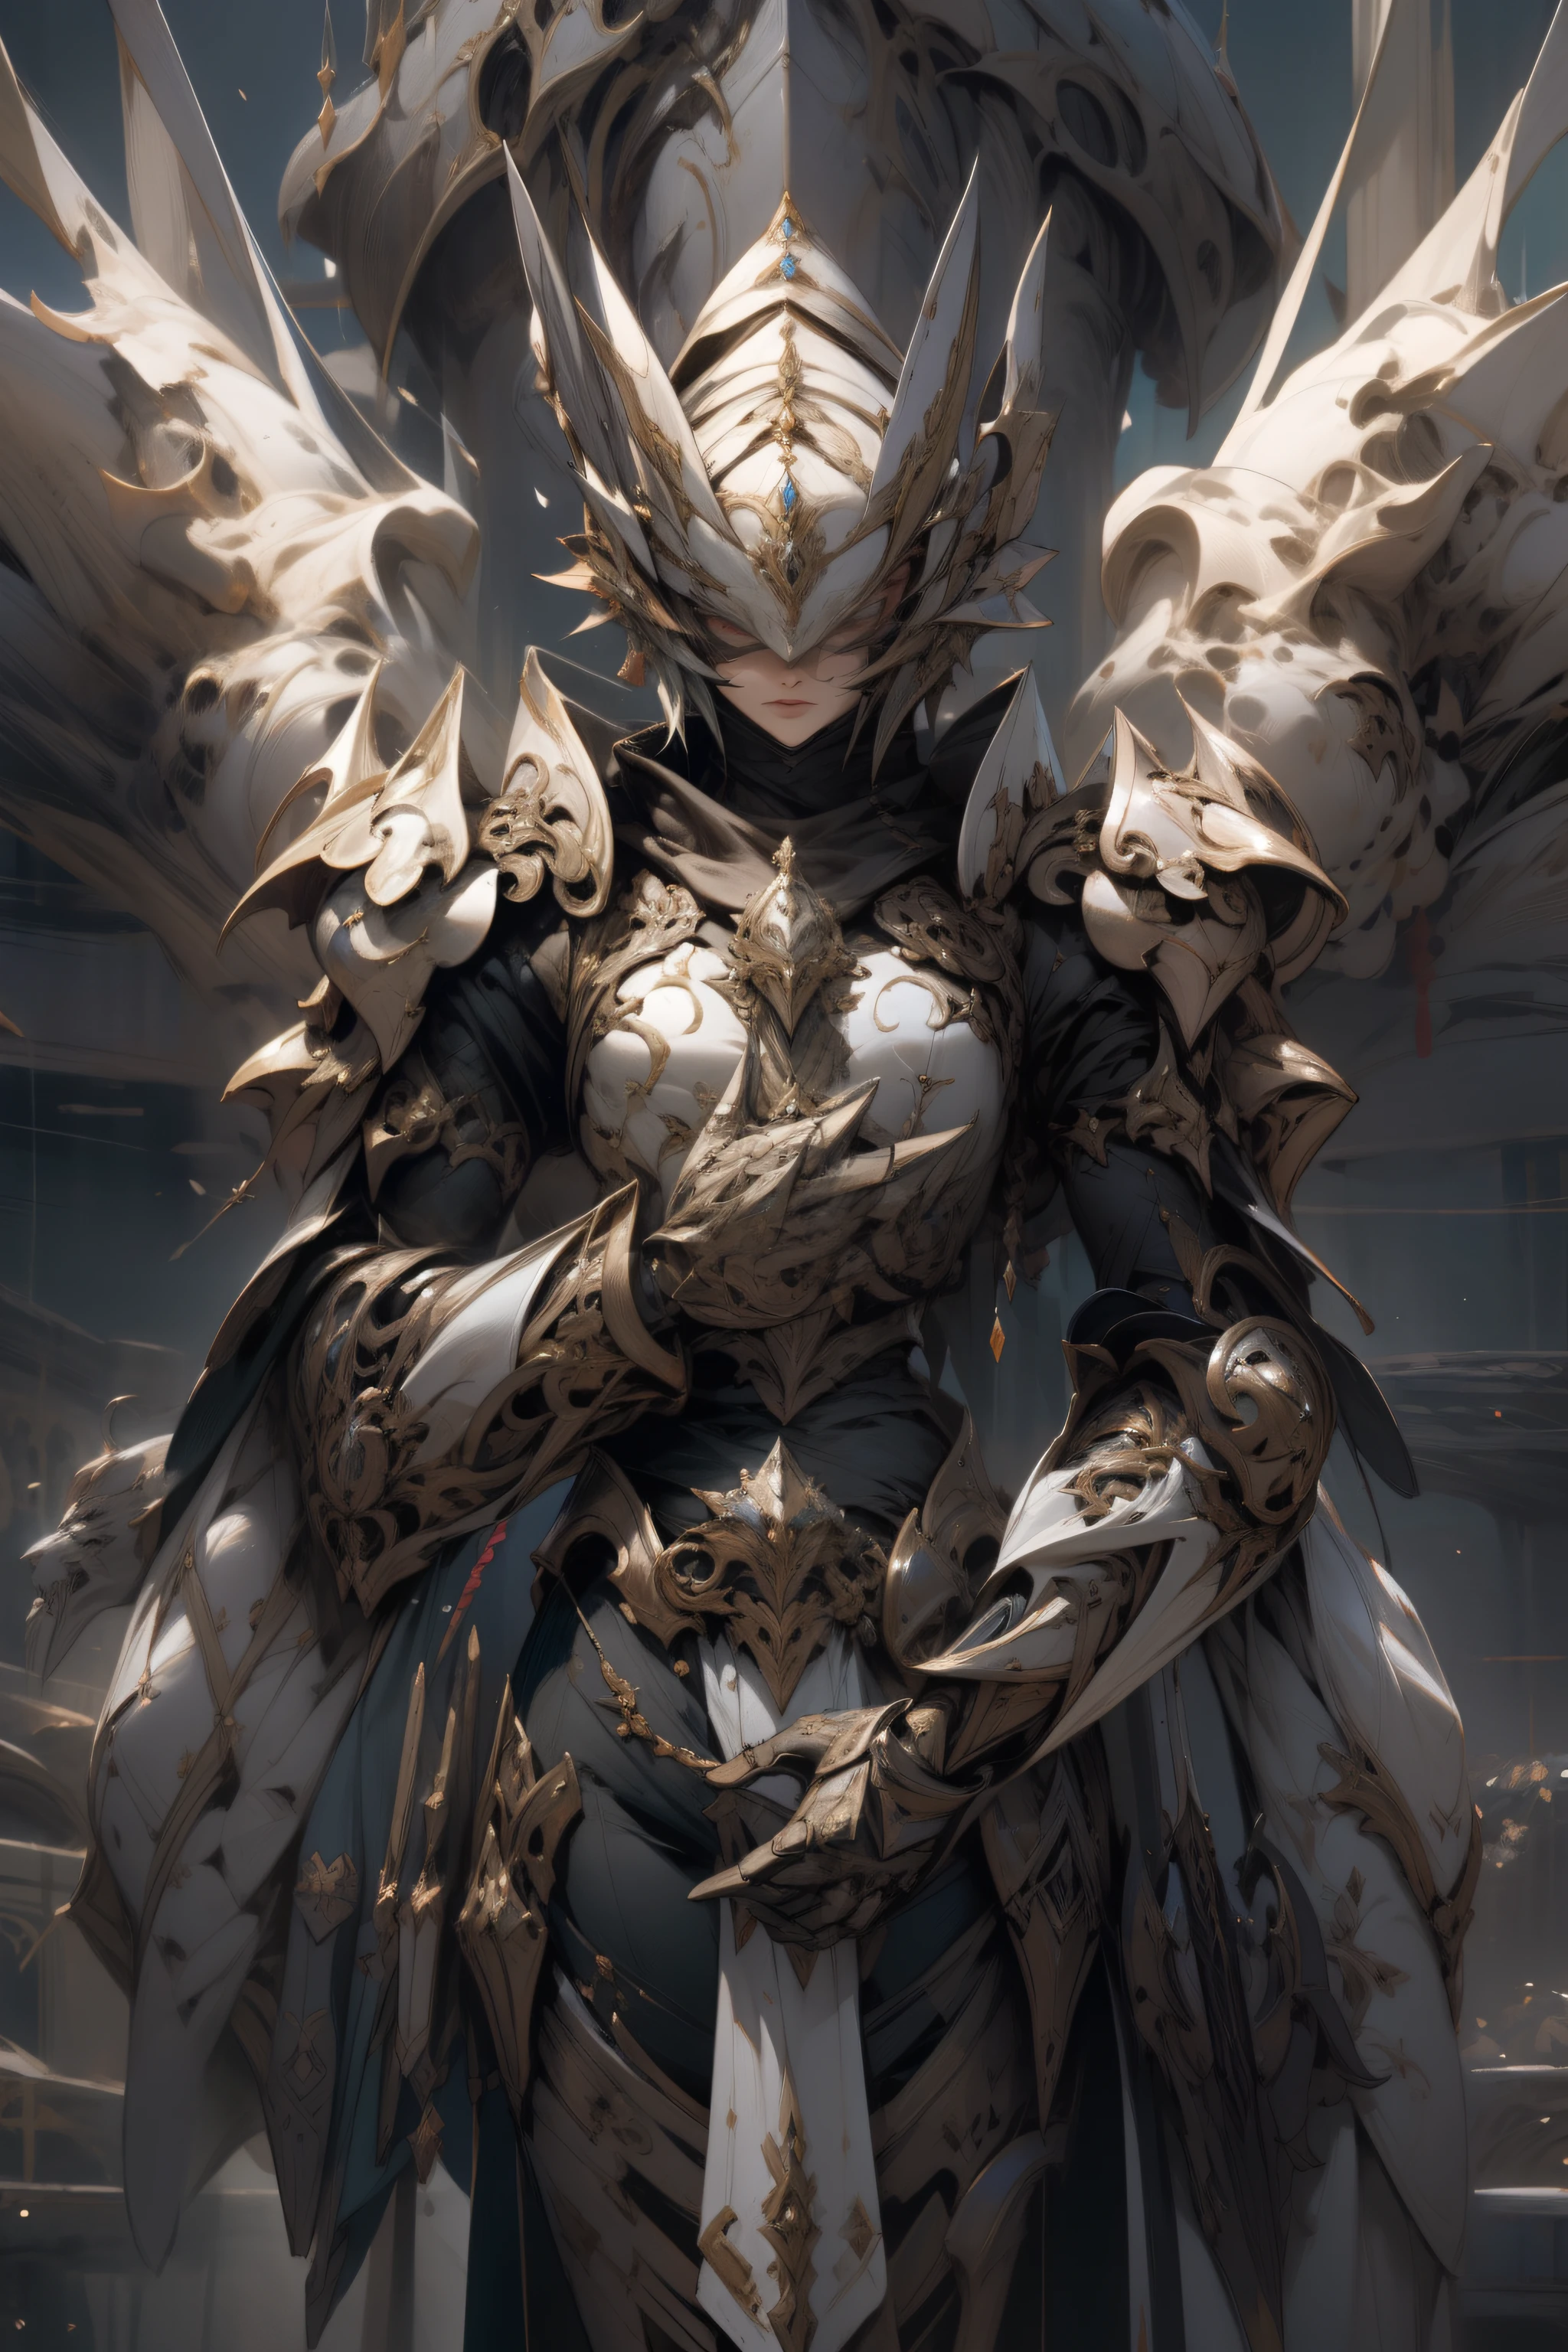 a close up of a person with a sword and wings, style of raymond swanland, epic exquisite character art, inspired by Raymond Swanland, 2. 5 d CGI动漫奇幻艺术作品, detailed digital 2d fantasy art, covered in full silver armor, detailed fantasy art, dressed in armor light, highly detailed fantasy art, epic fantasy character art, stunning character art